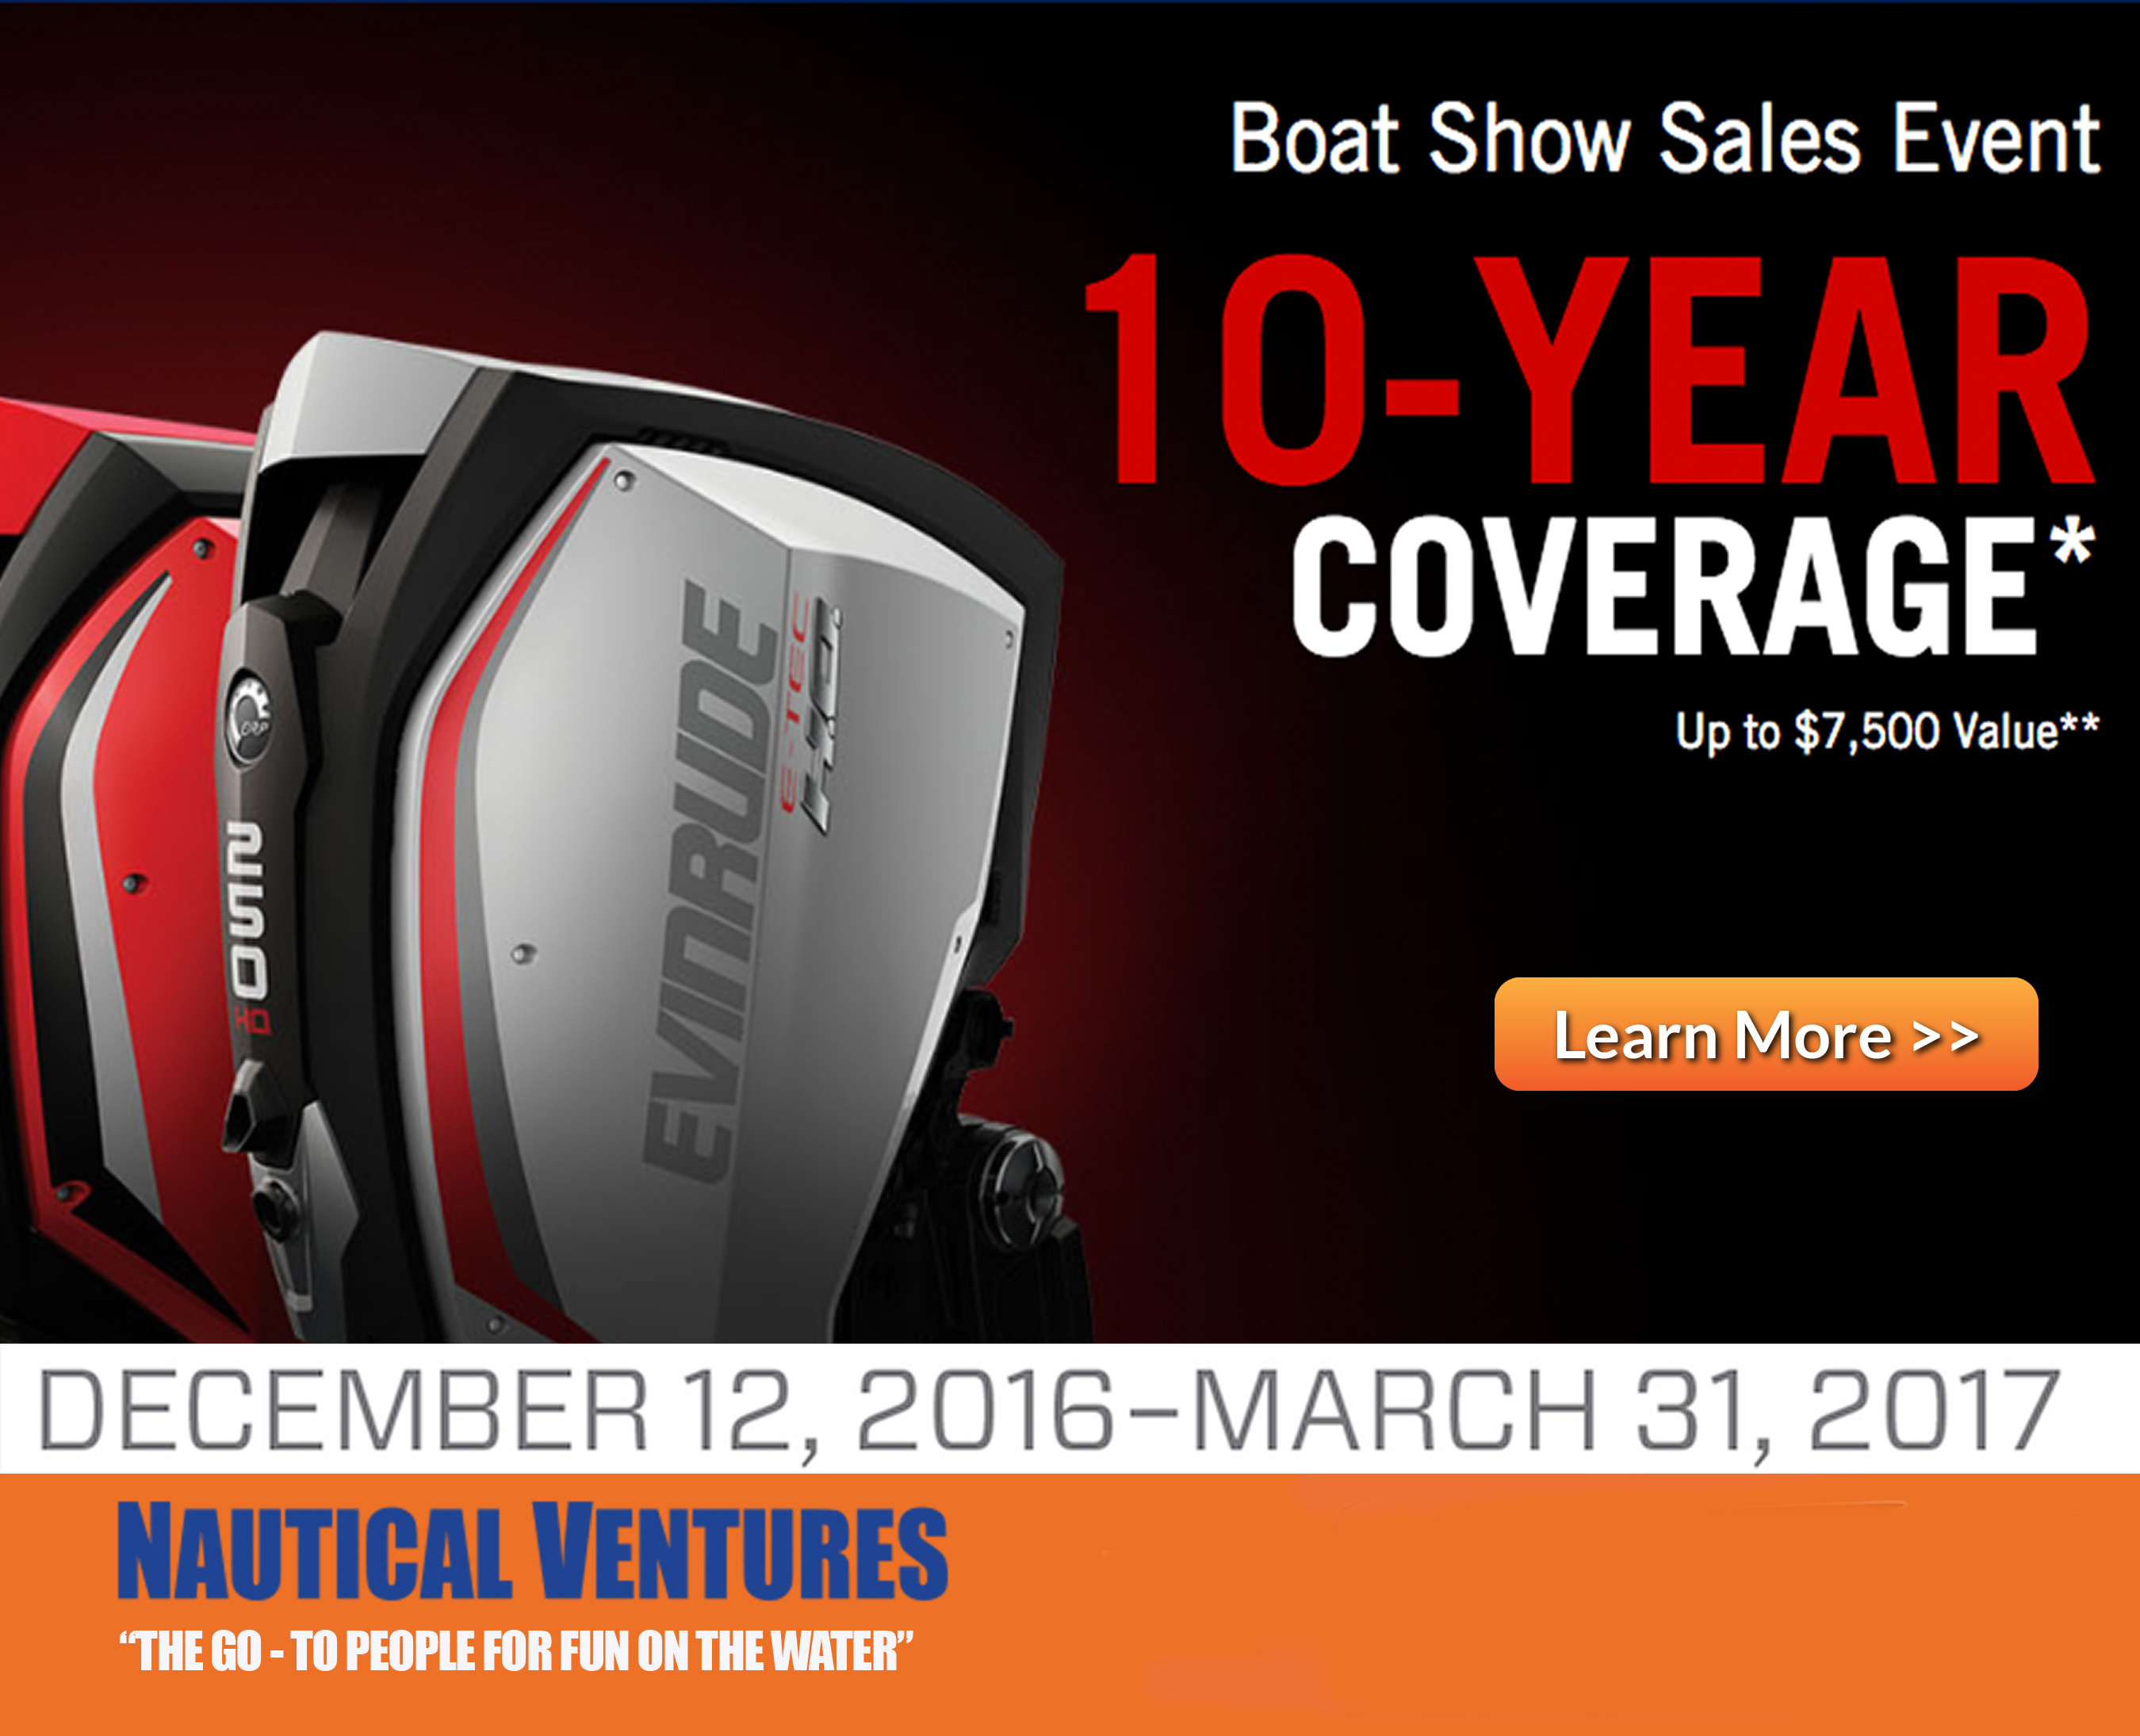 Evinrude Boat Show Sales Event  10-YEAR   COVERAGE*    Up to $7,500 Value**